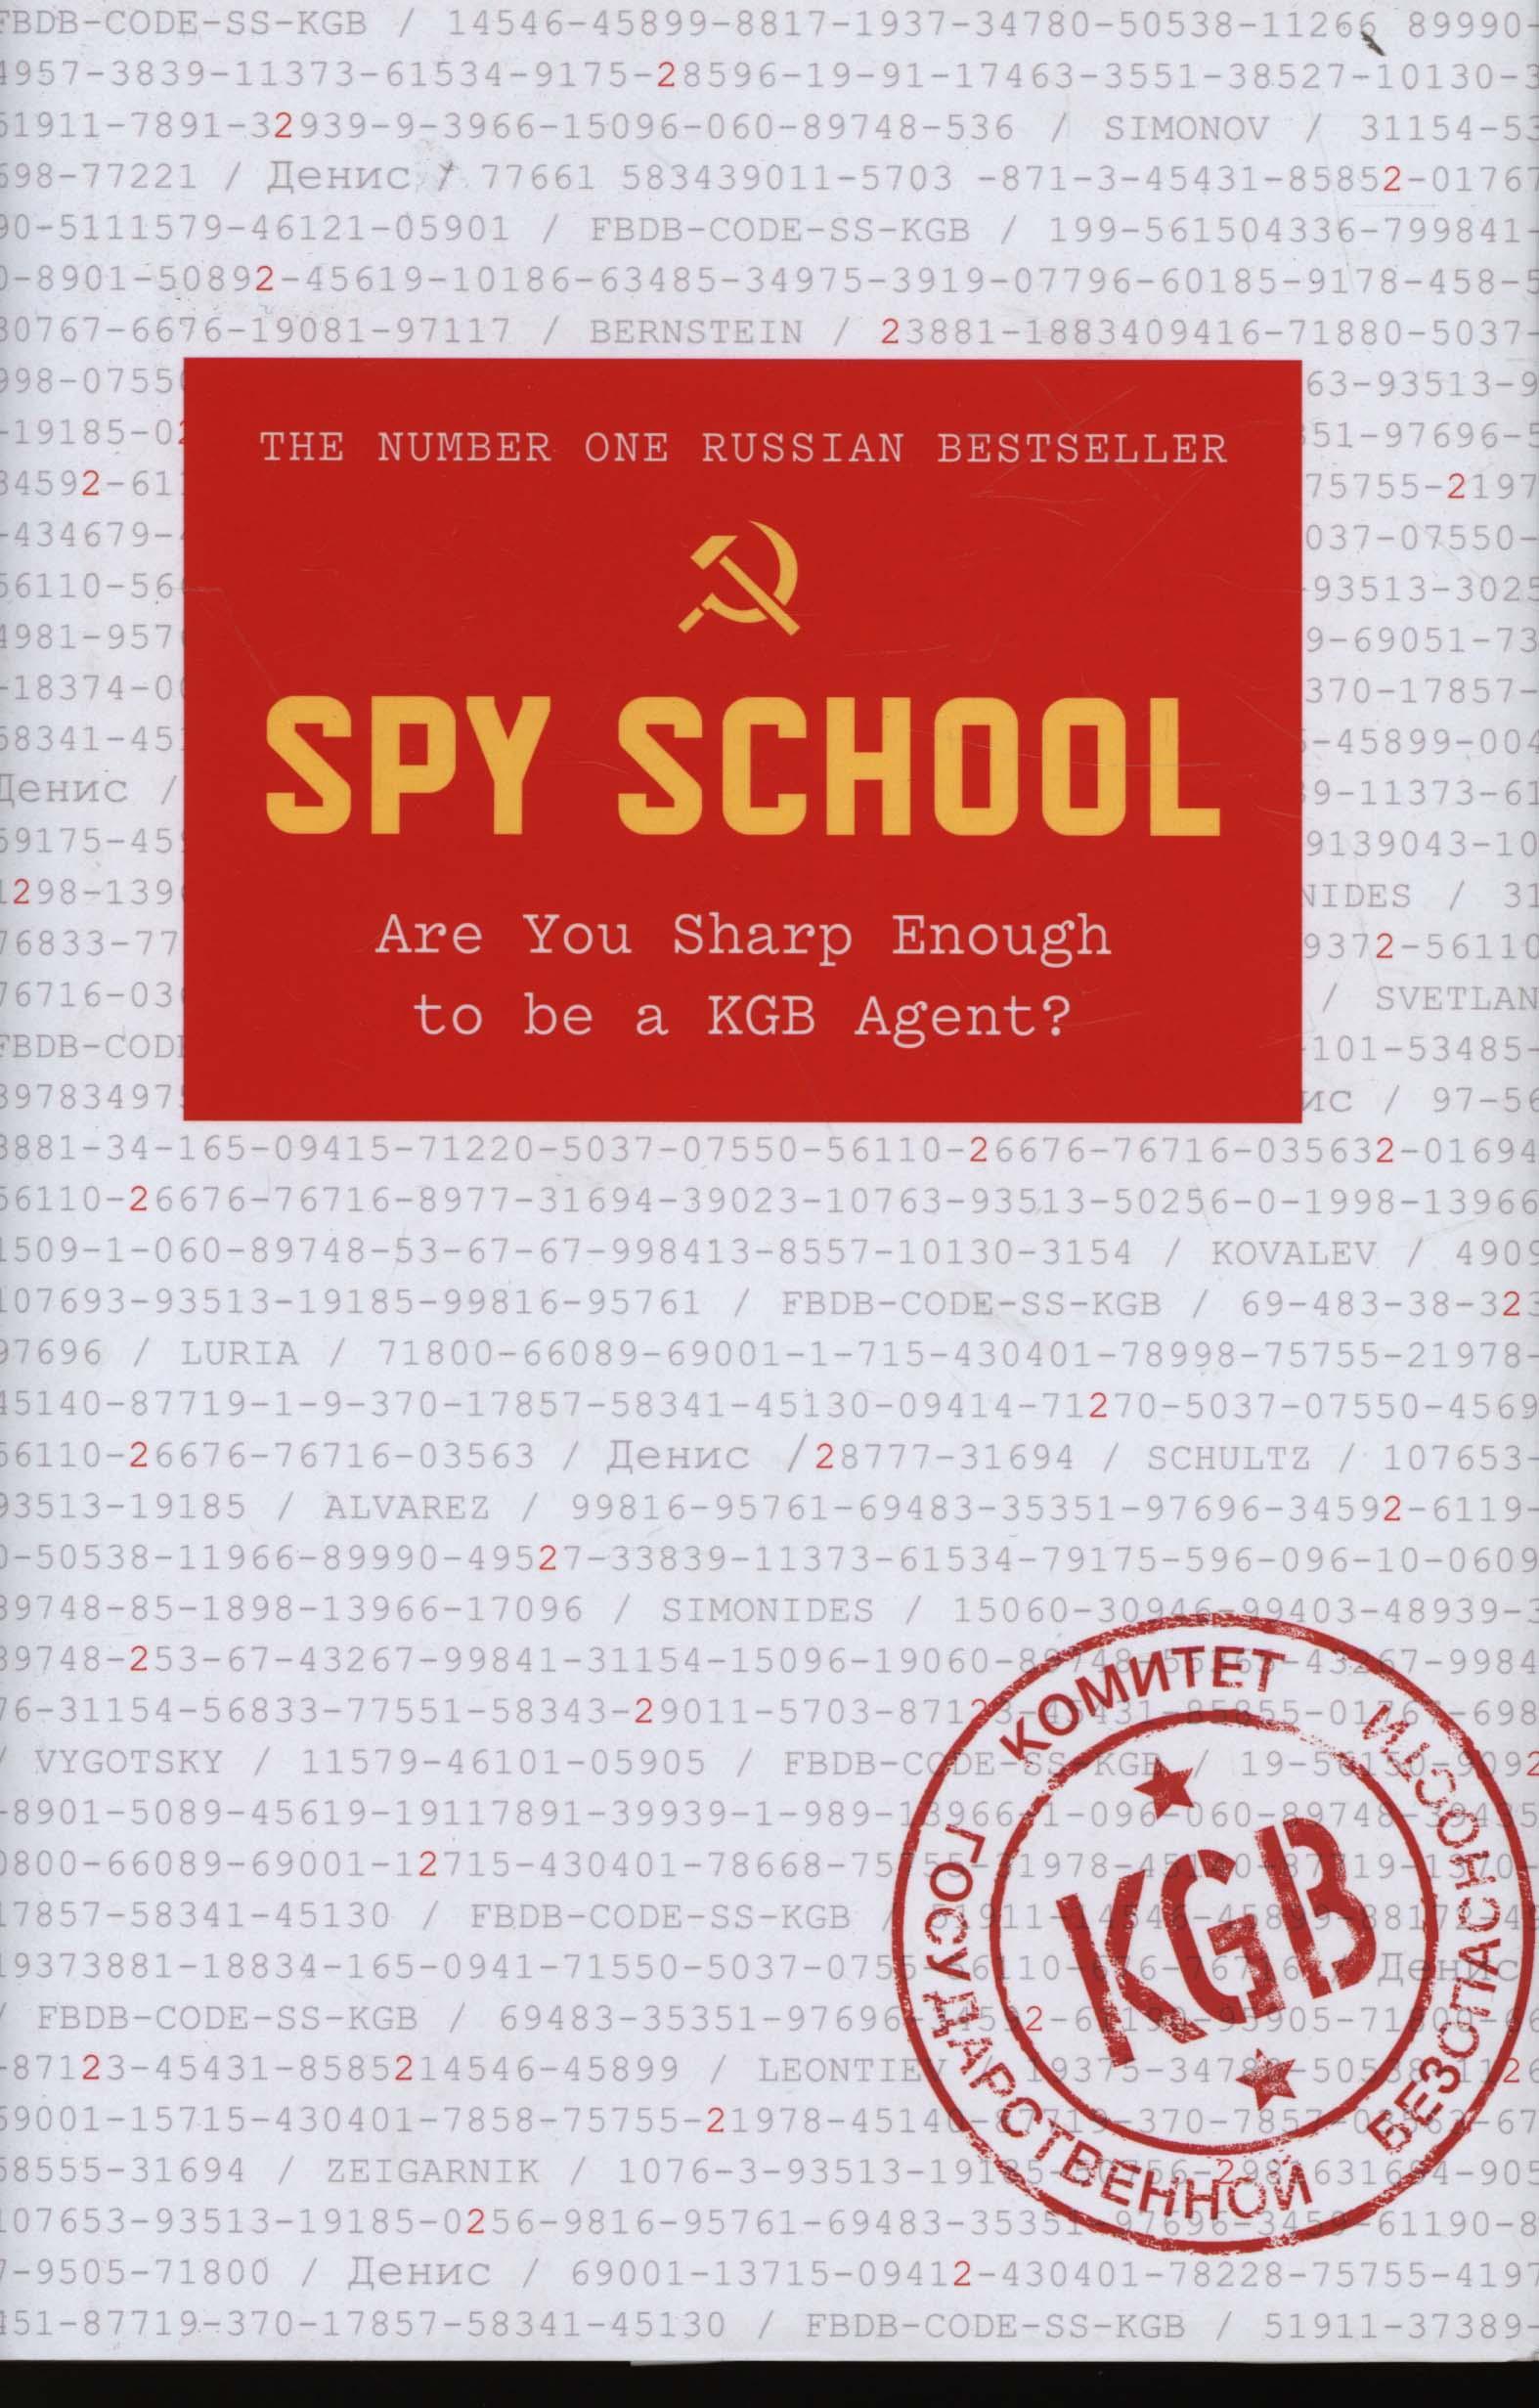 Spy School: Are You Sharp Enough to be a KGB Agent? - Denis Bukin